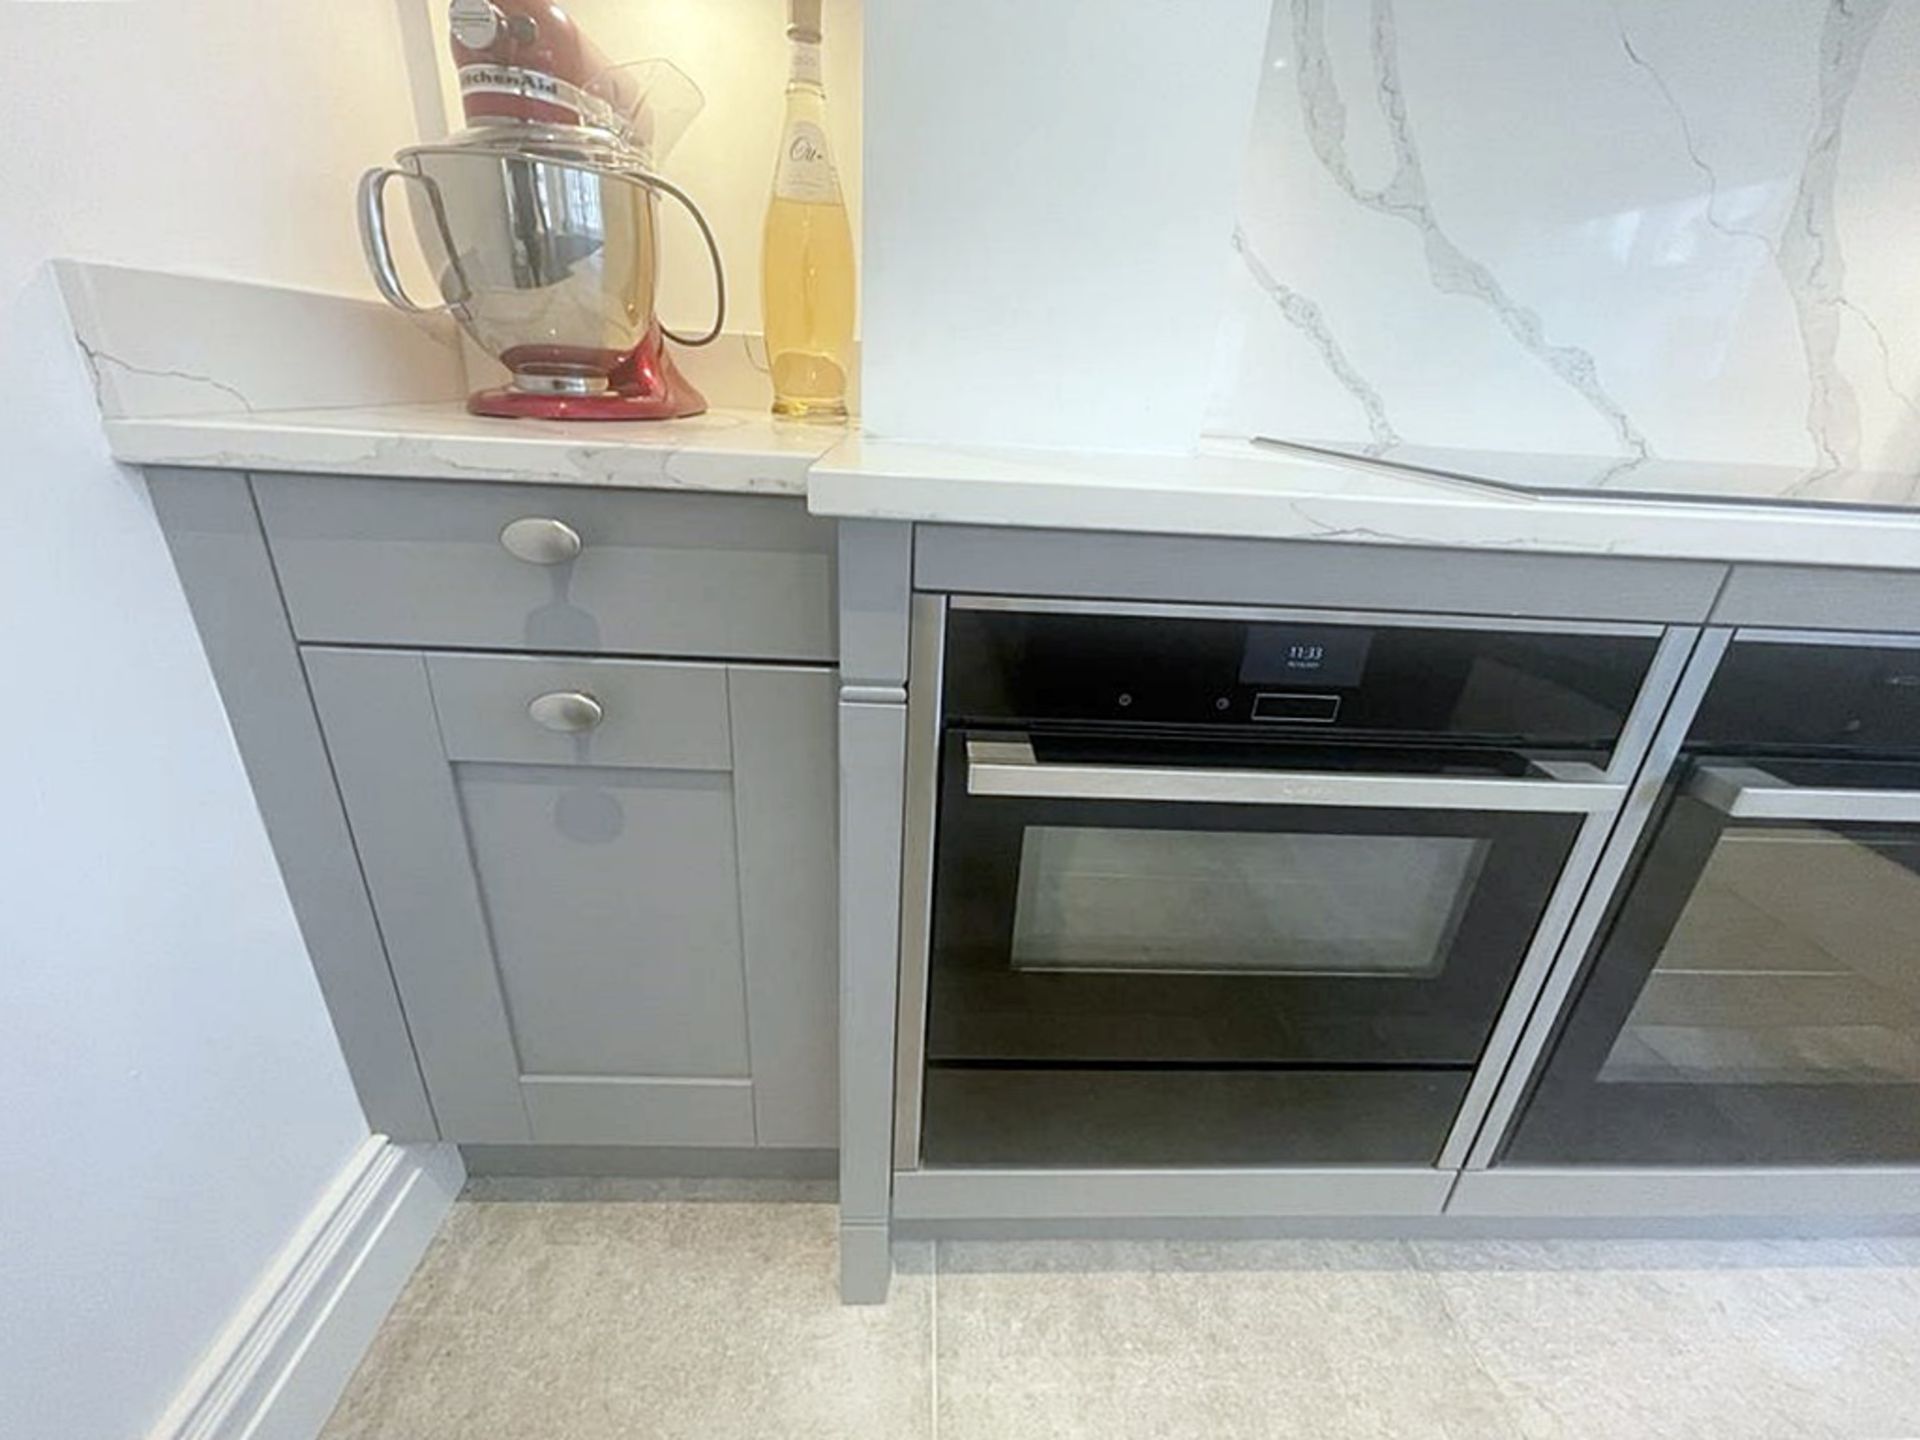 1 x SIEMATIC Bespoke Shaker-style Fitted Kitchen, Utility Room, Appliances & Modern Quartz Surfaces - Image 16 of 153